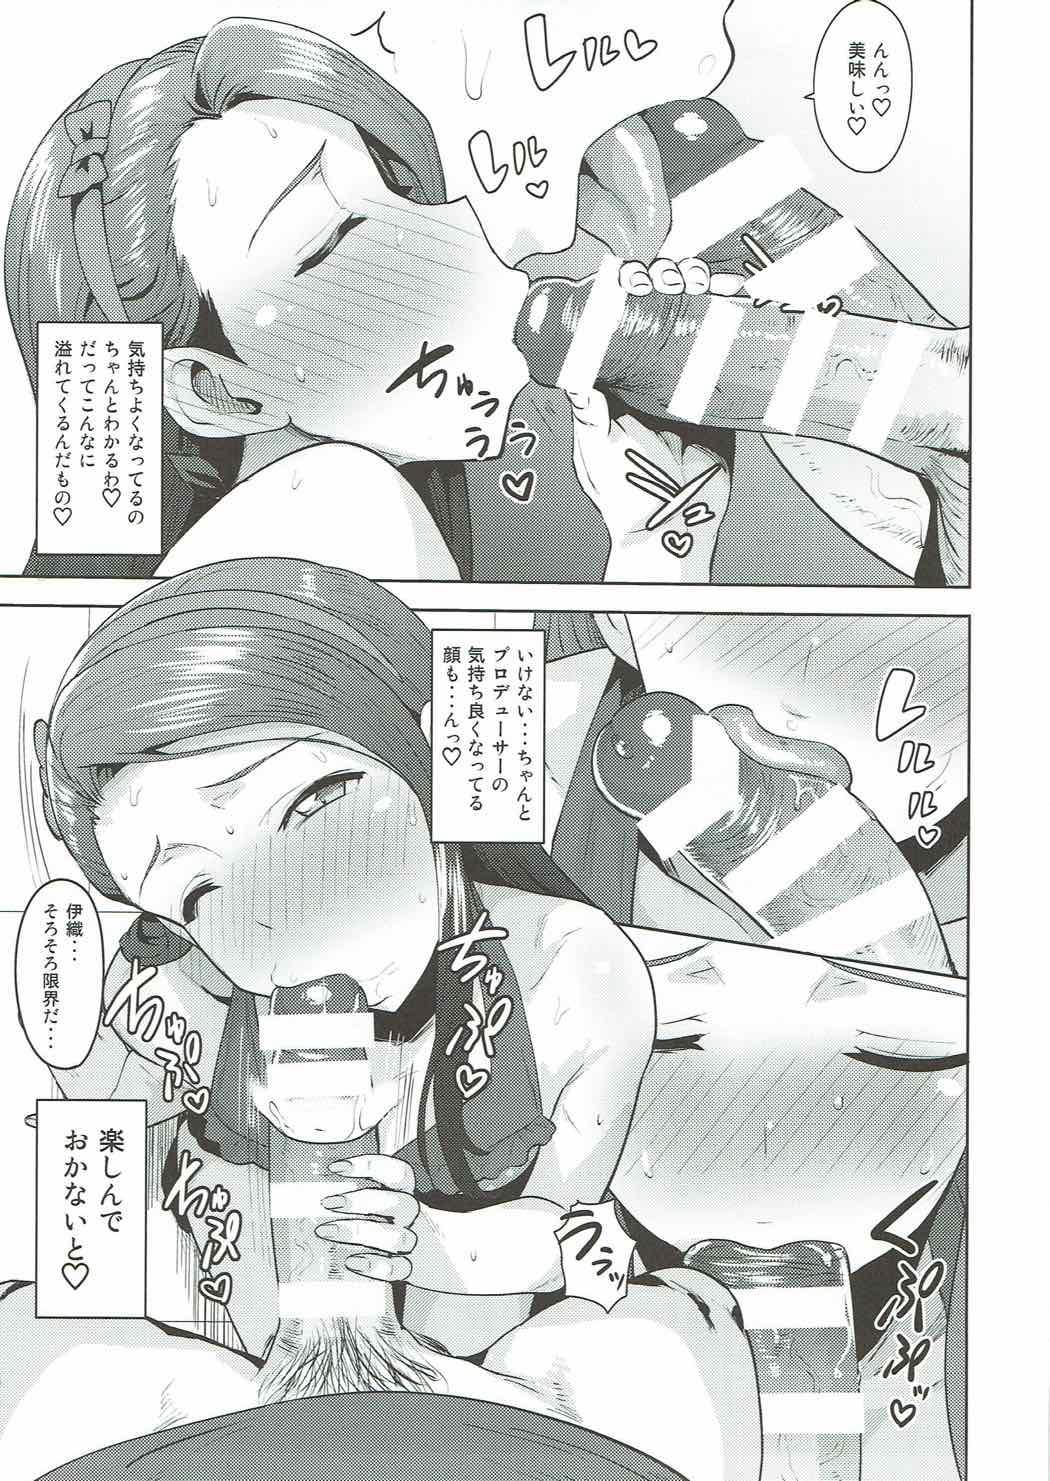 Blondes Ama-Ama Iorin 2 - The idolmaster Compilation - Page 10